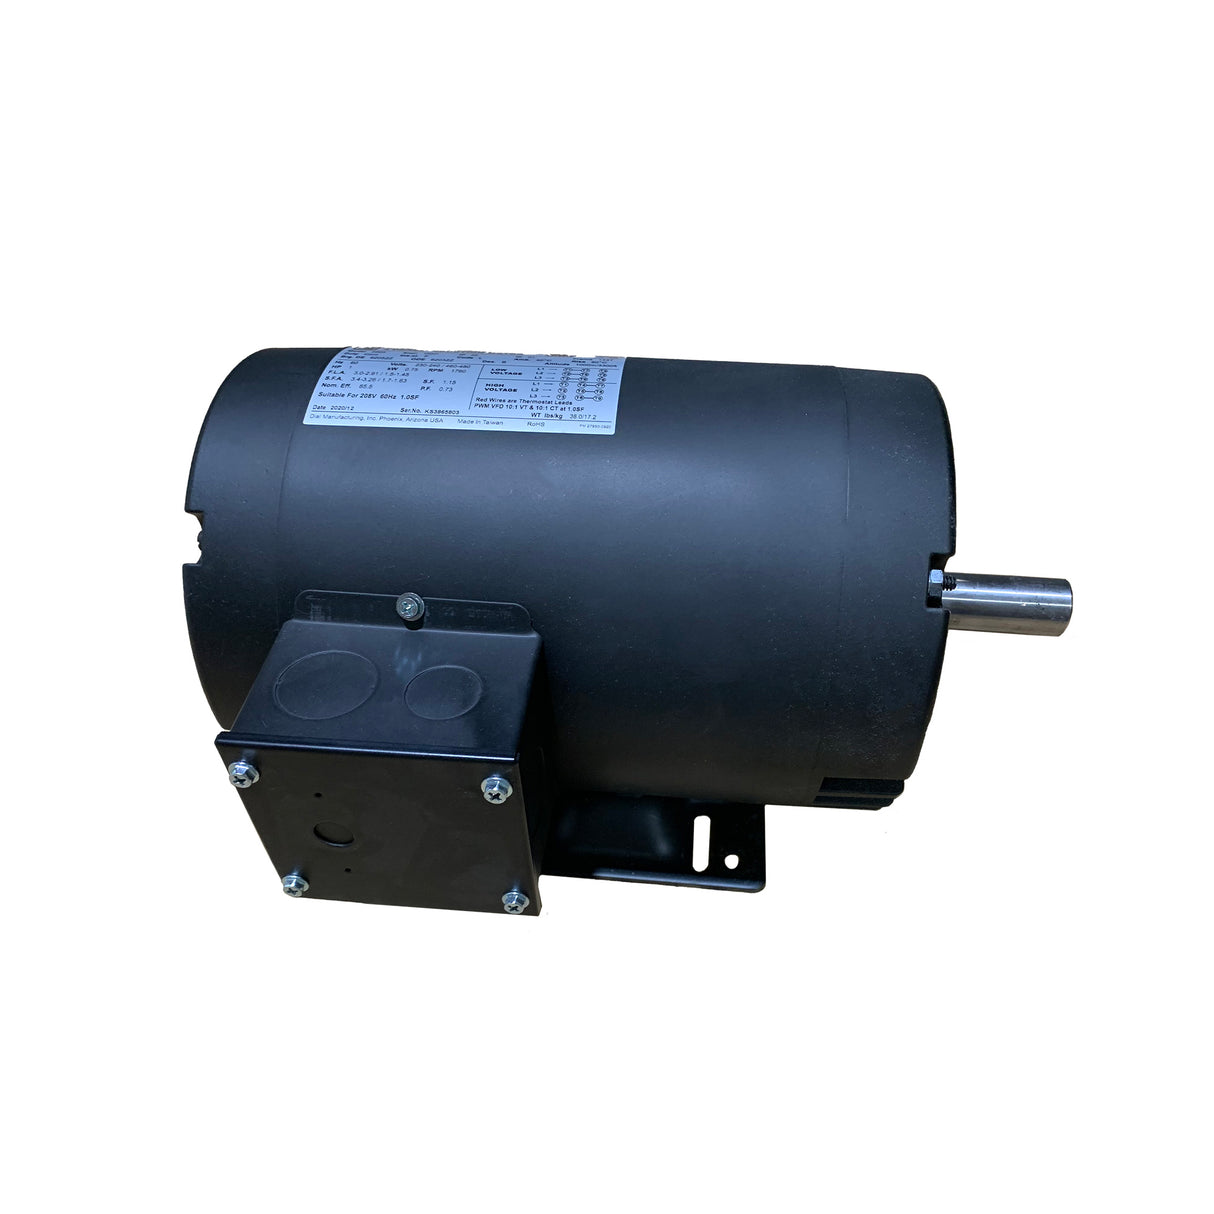 Dial Manufacturing 230/460V 10 HP 3 Phase Industrial Motor